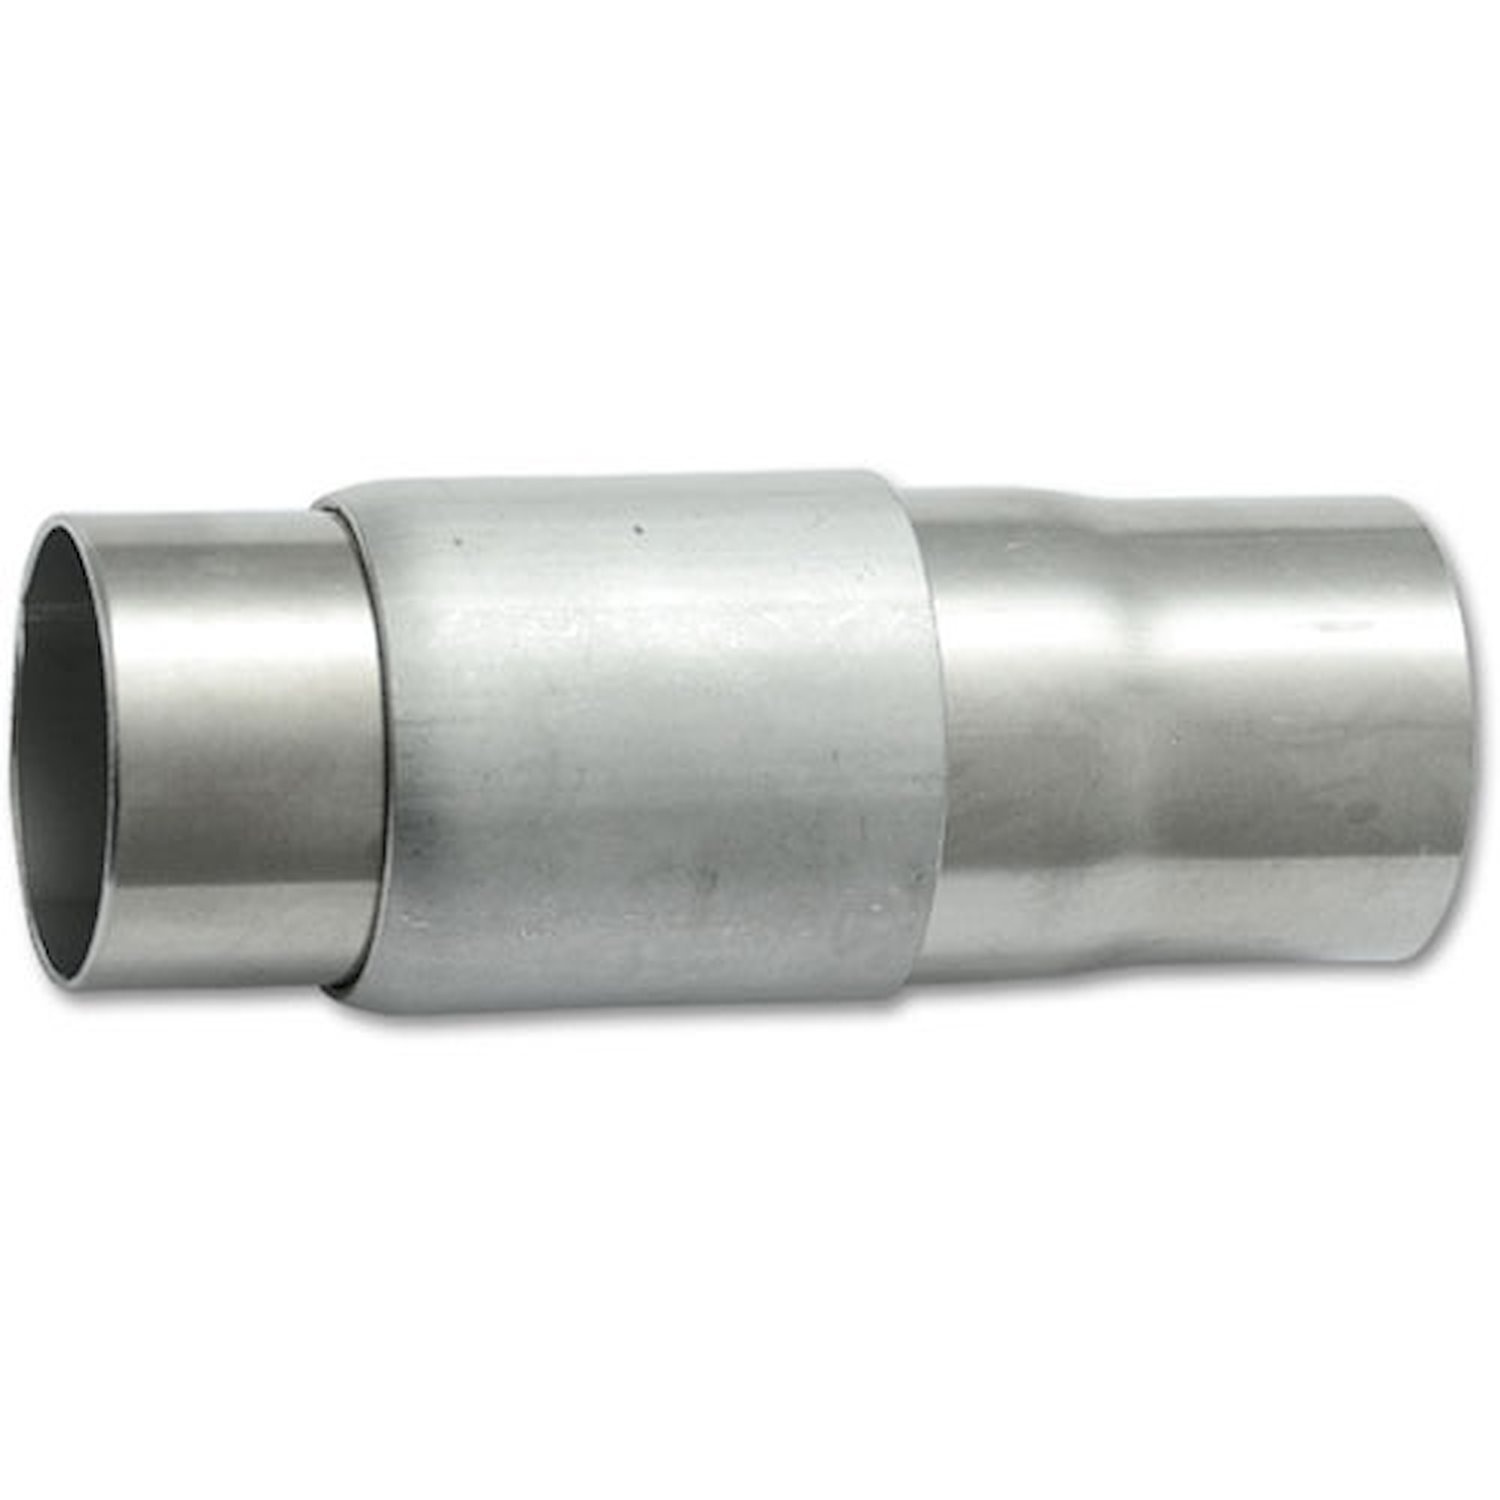 Double Slip Joint Fitting For use with 3" O.D. Tubing